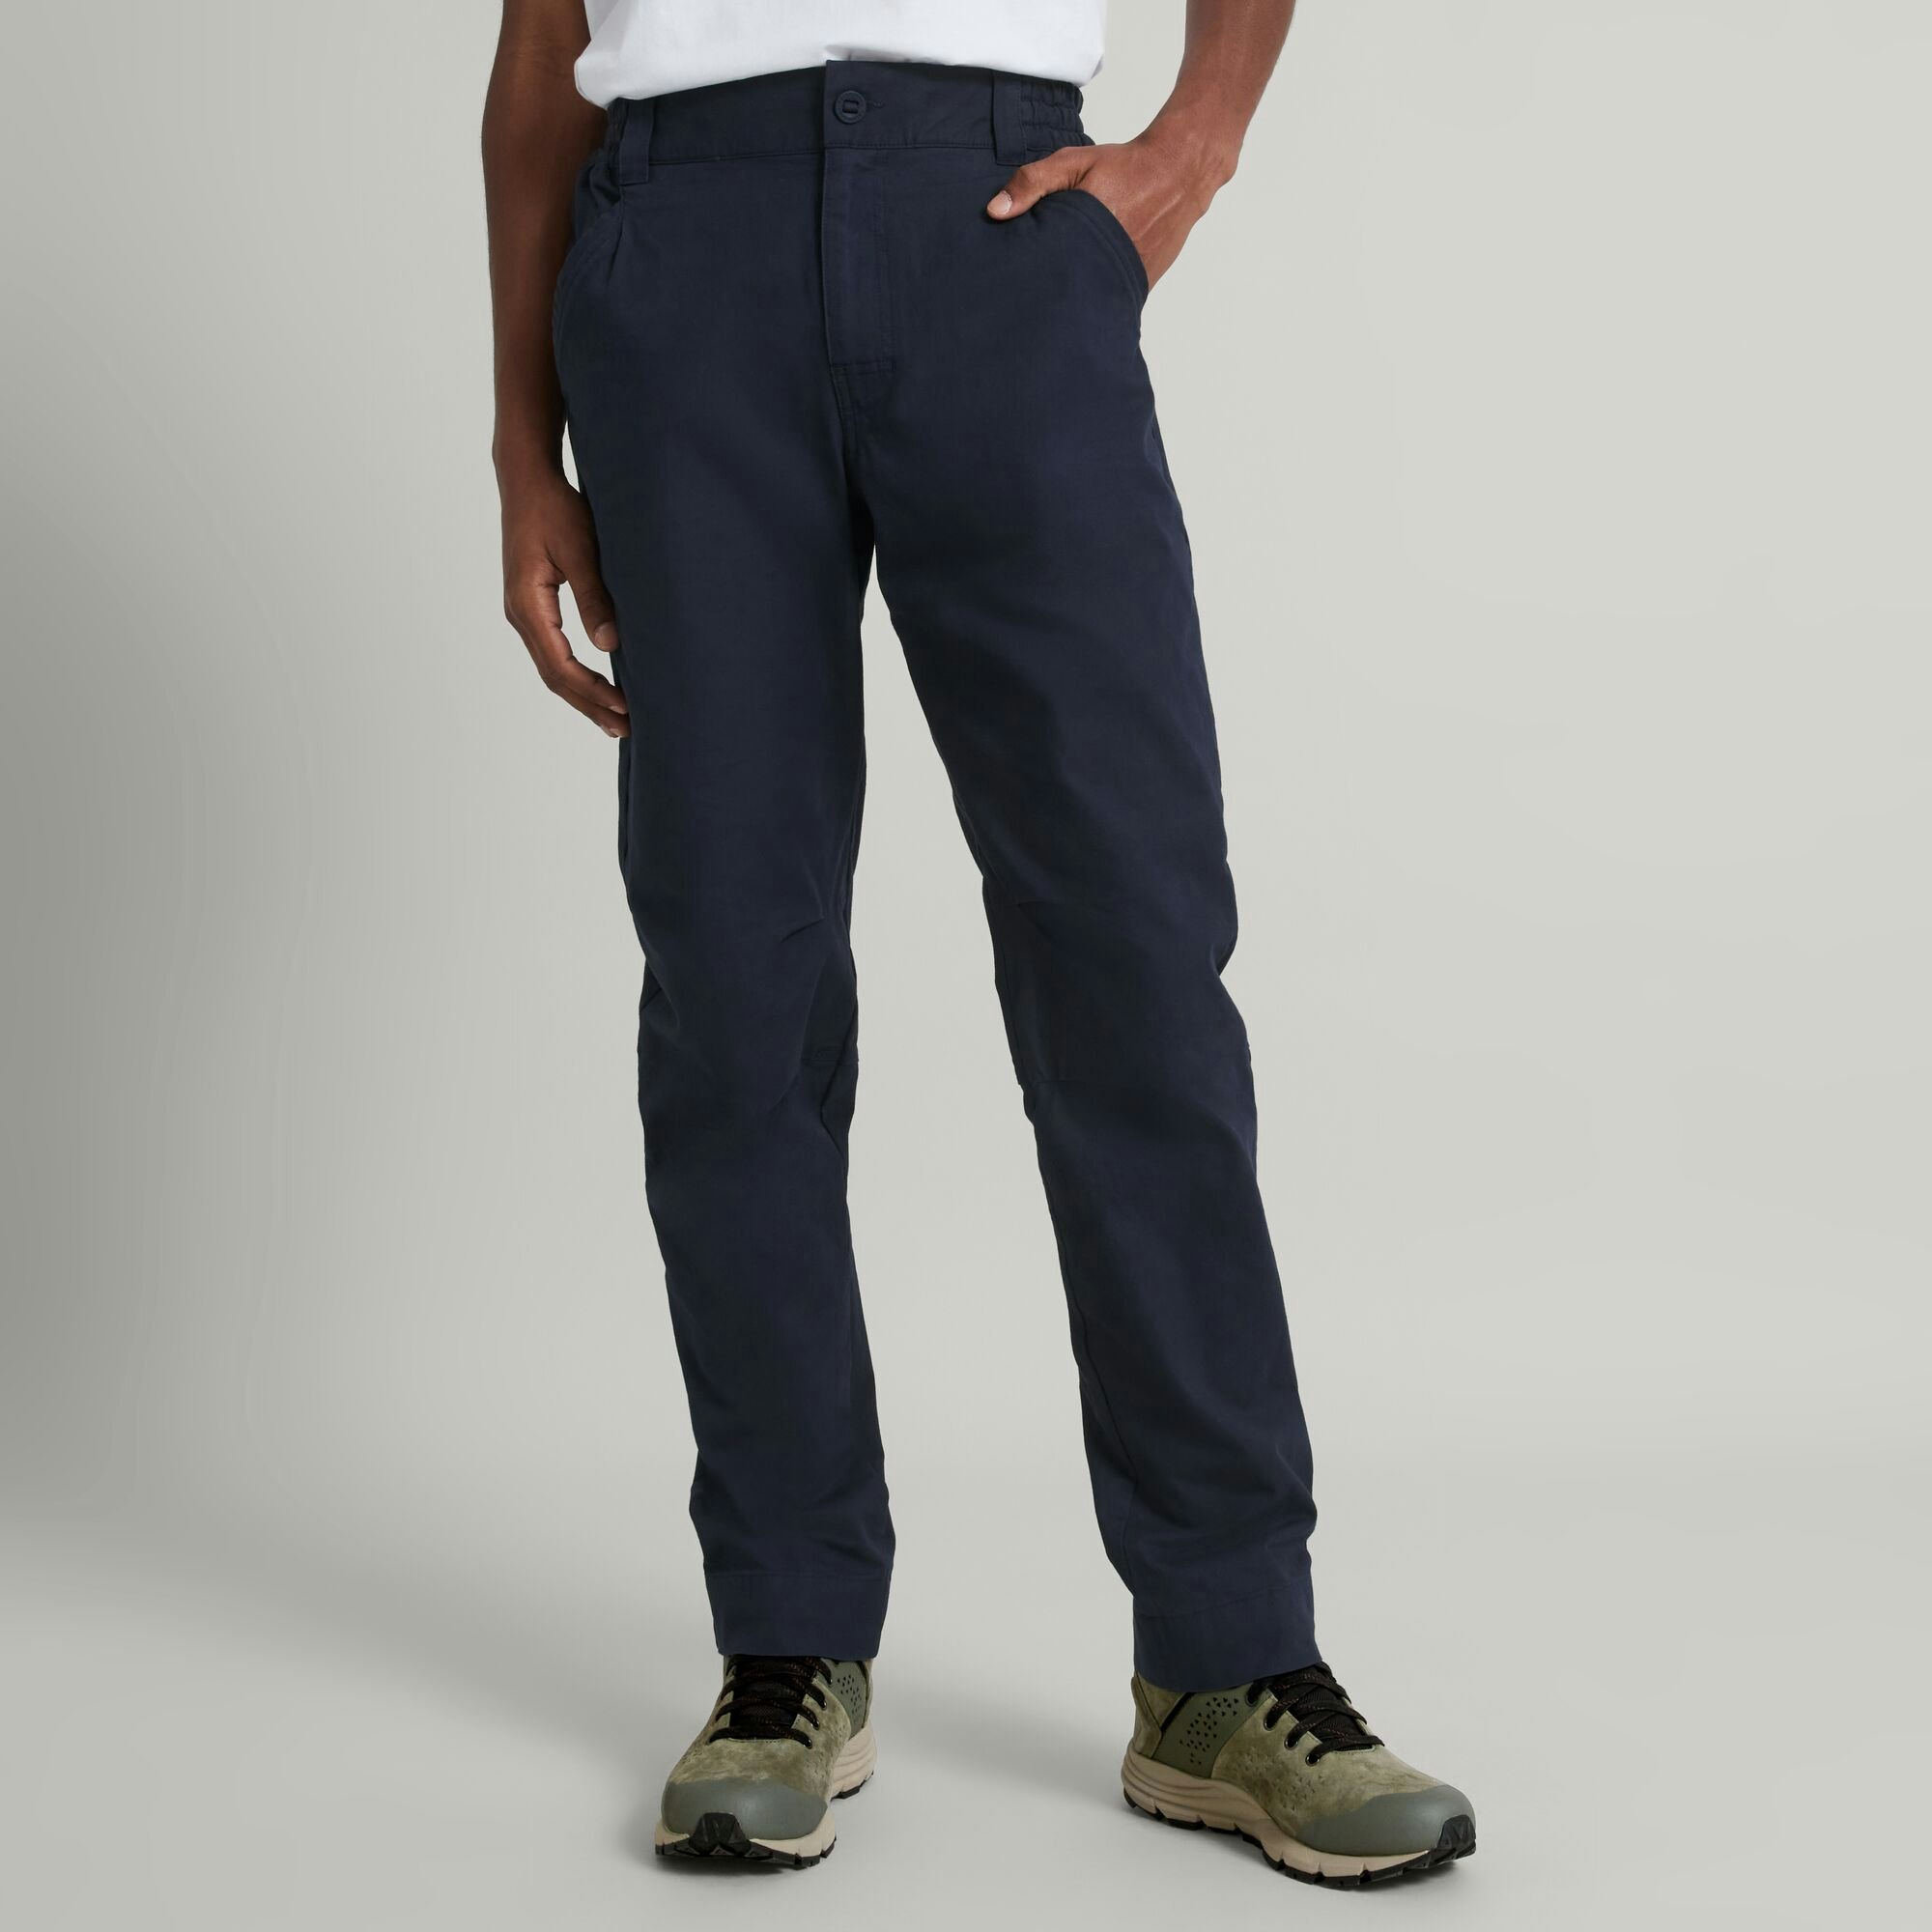 Buy Gray Four Pocket Cargo Pants Pure Cotton for Best Price, Reviews, Free  Shipping